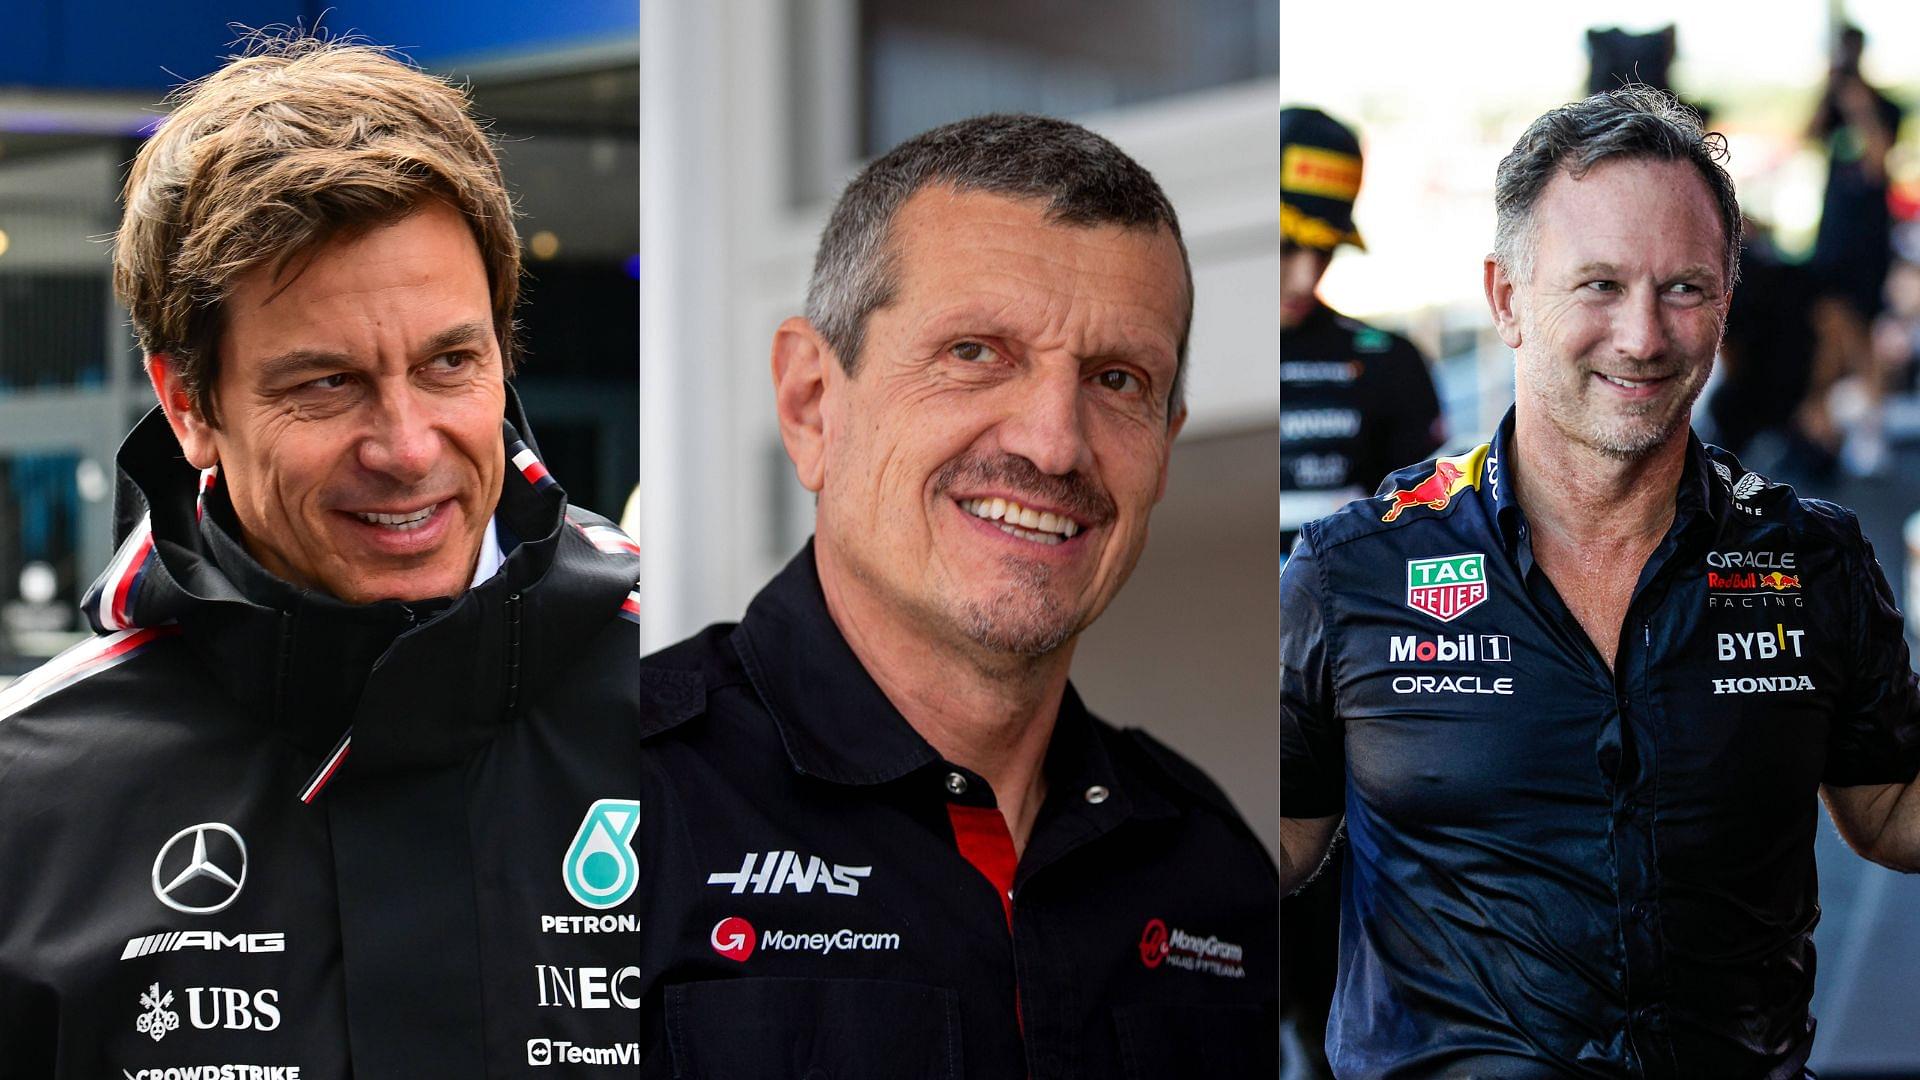 Guenther Steiner Admits He Won’t Win a Race Against Toto Wolff or Christian Horner - “I’m Useless”